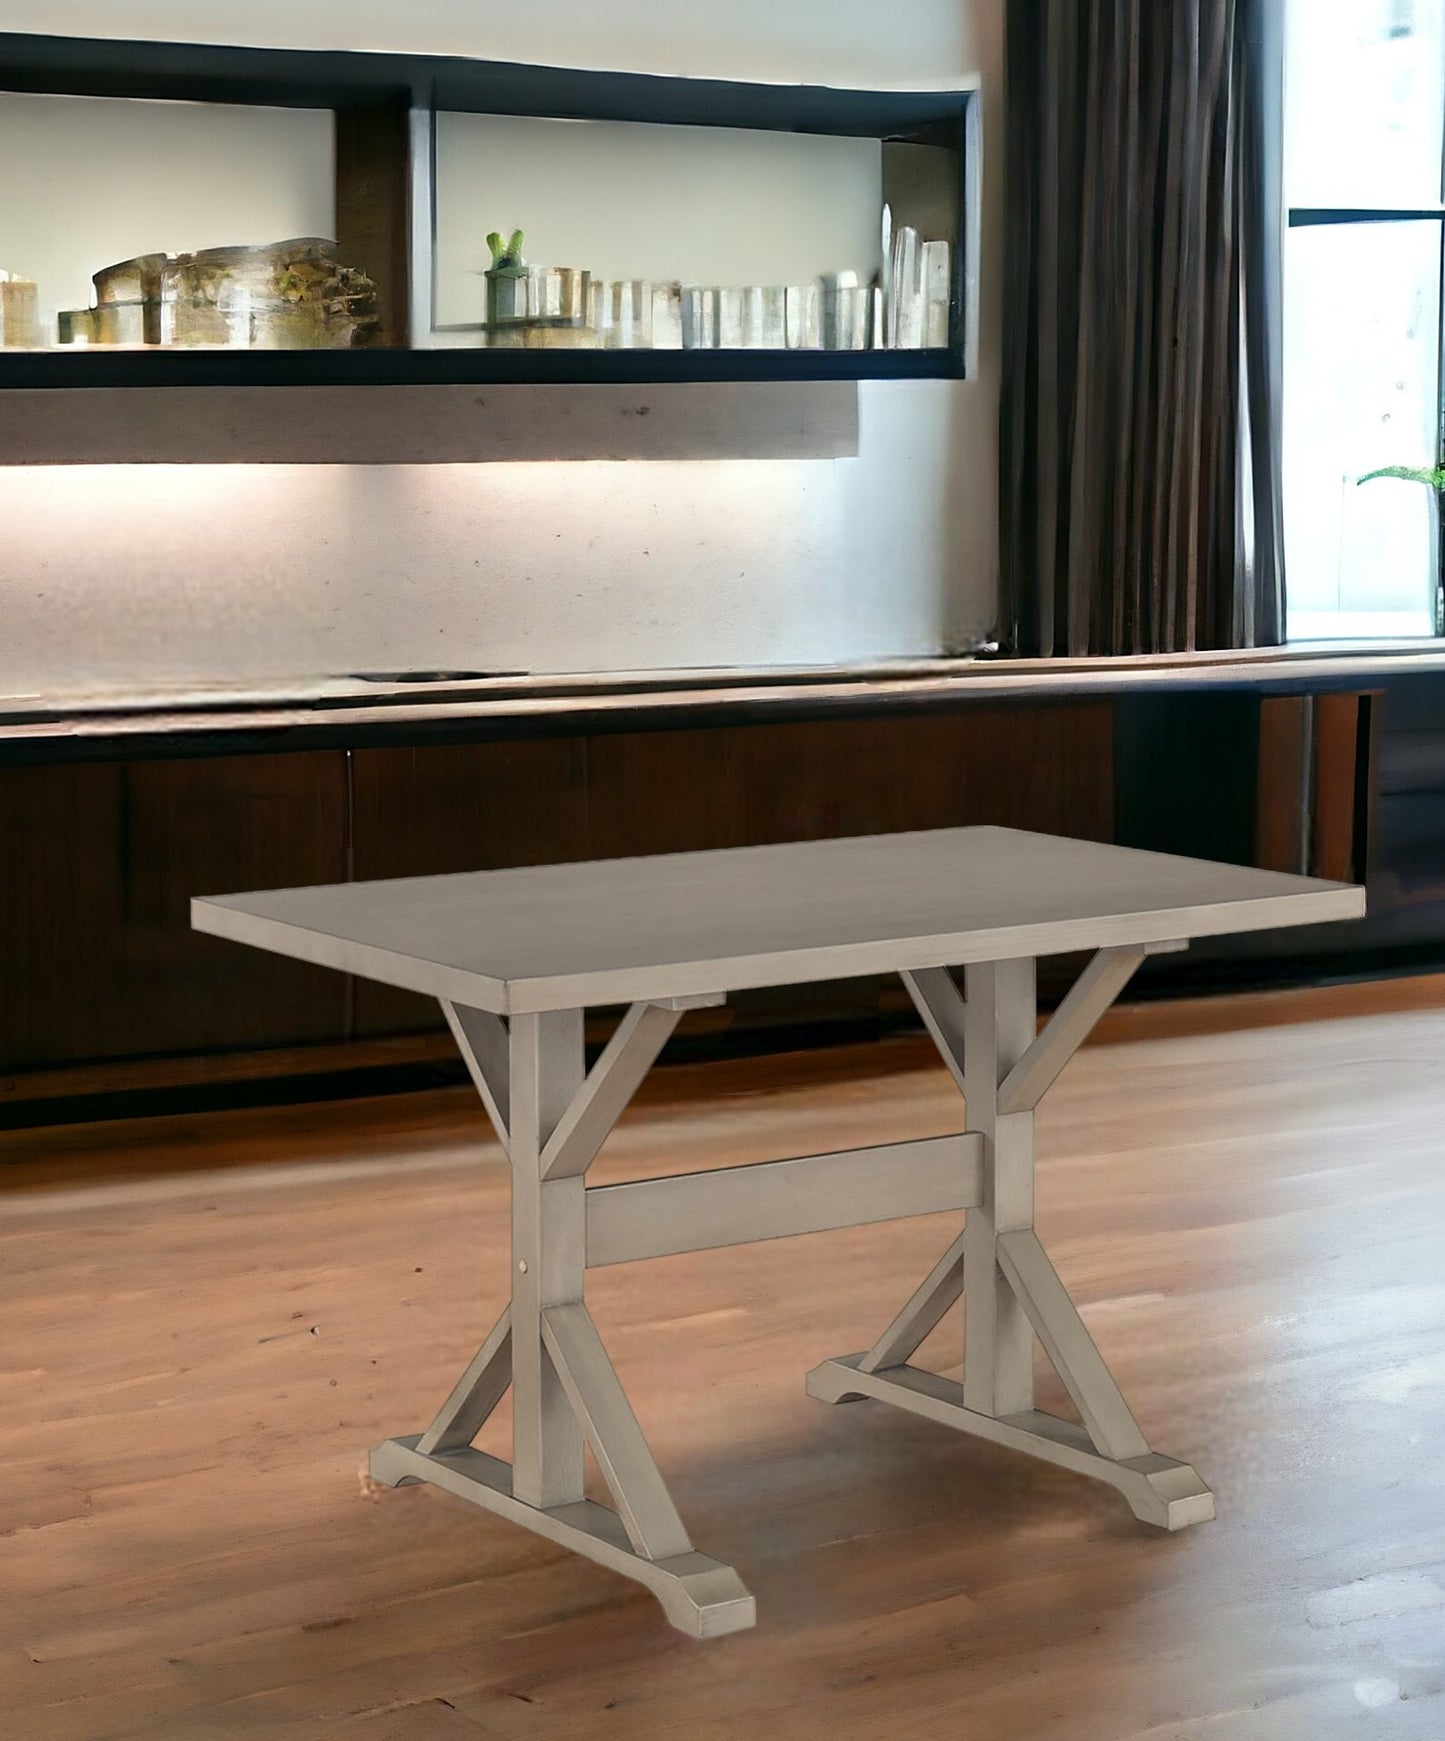 48" Gray Solid Wood Trestle Base Dining Table